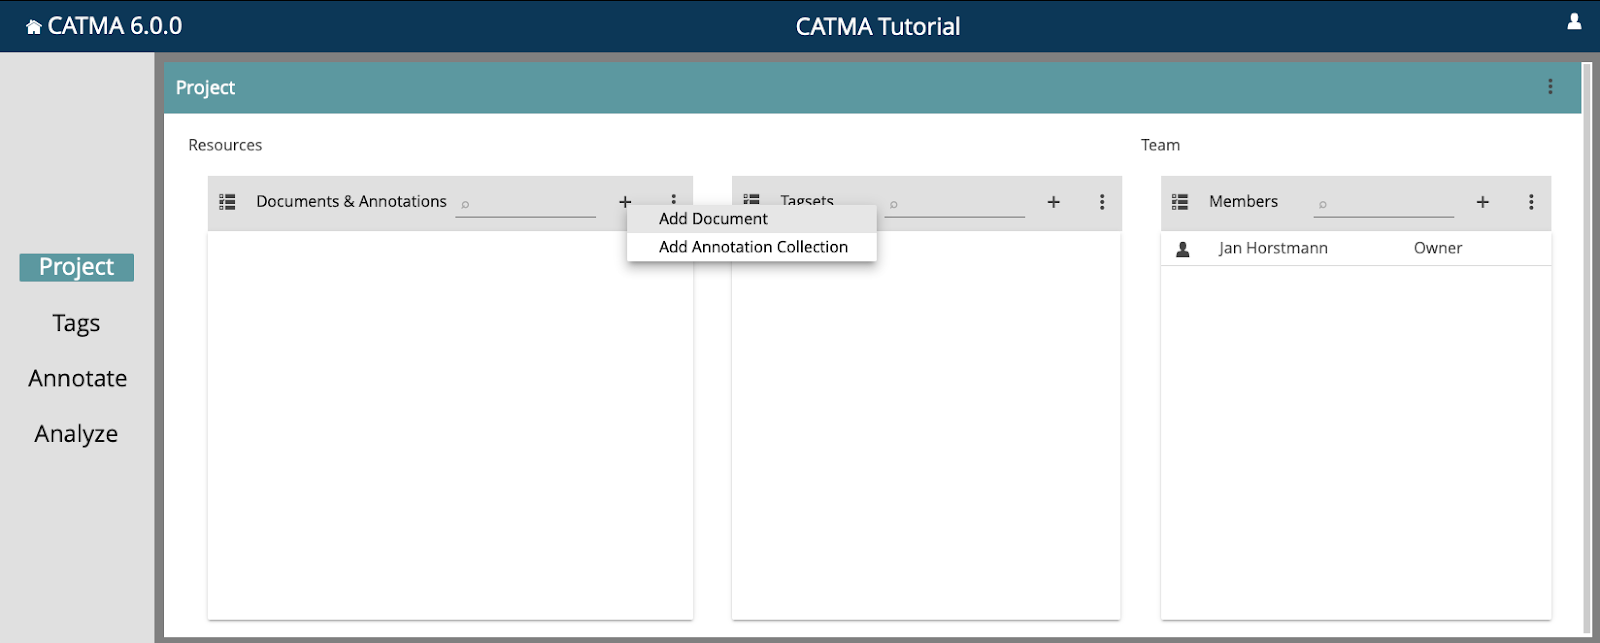 Image shows how to add a new document or annotation collection in CATMA